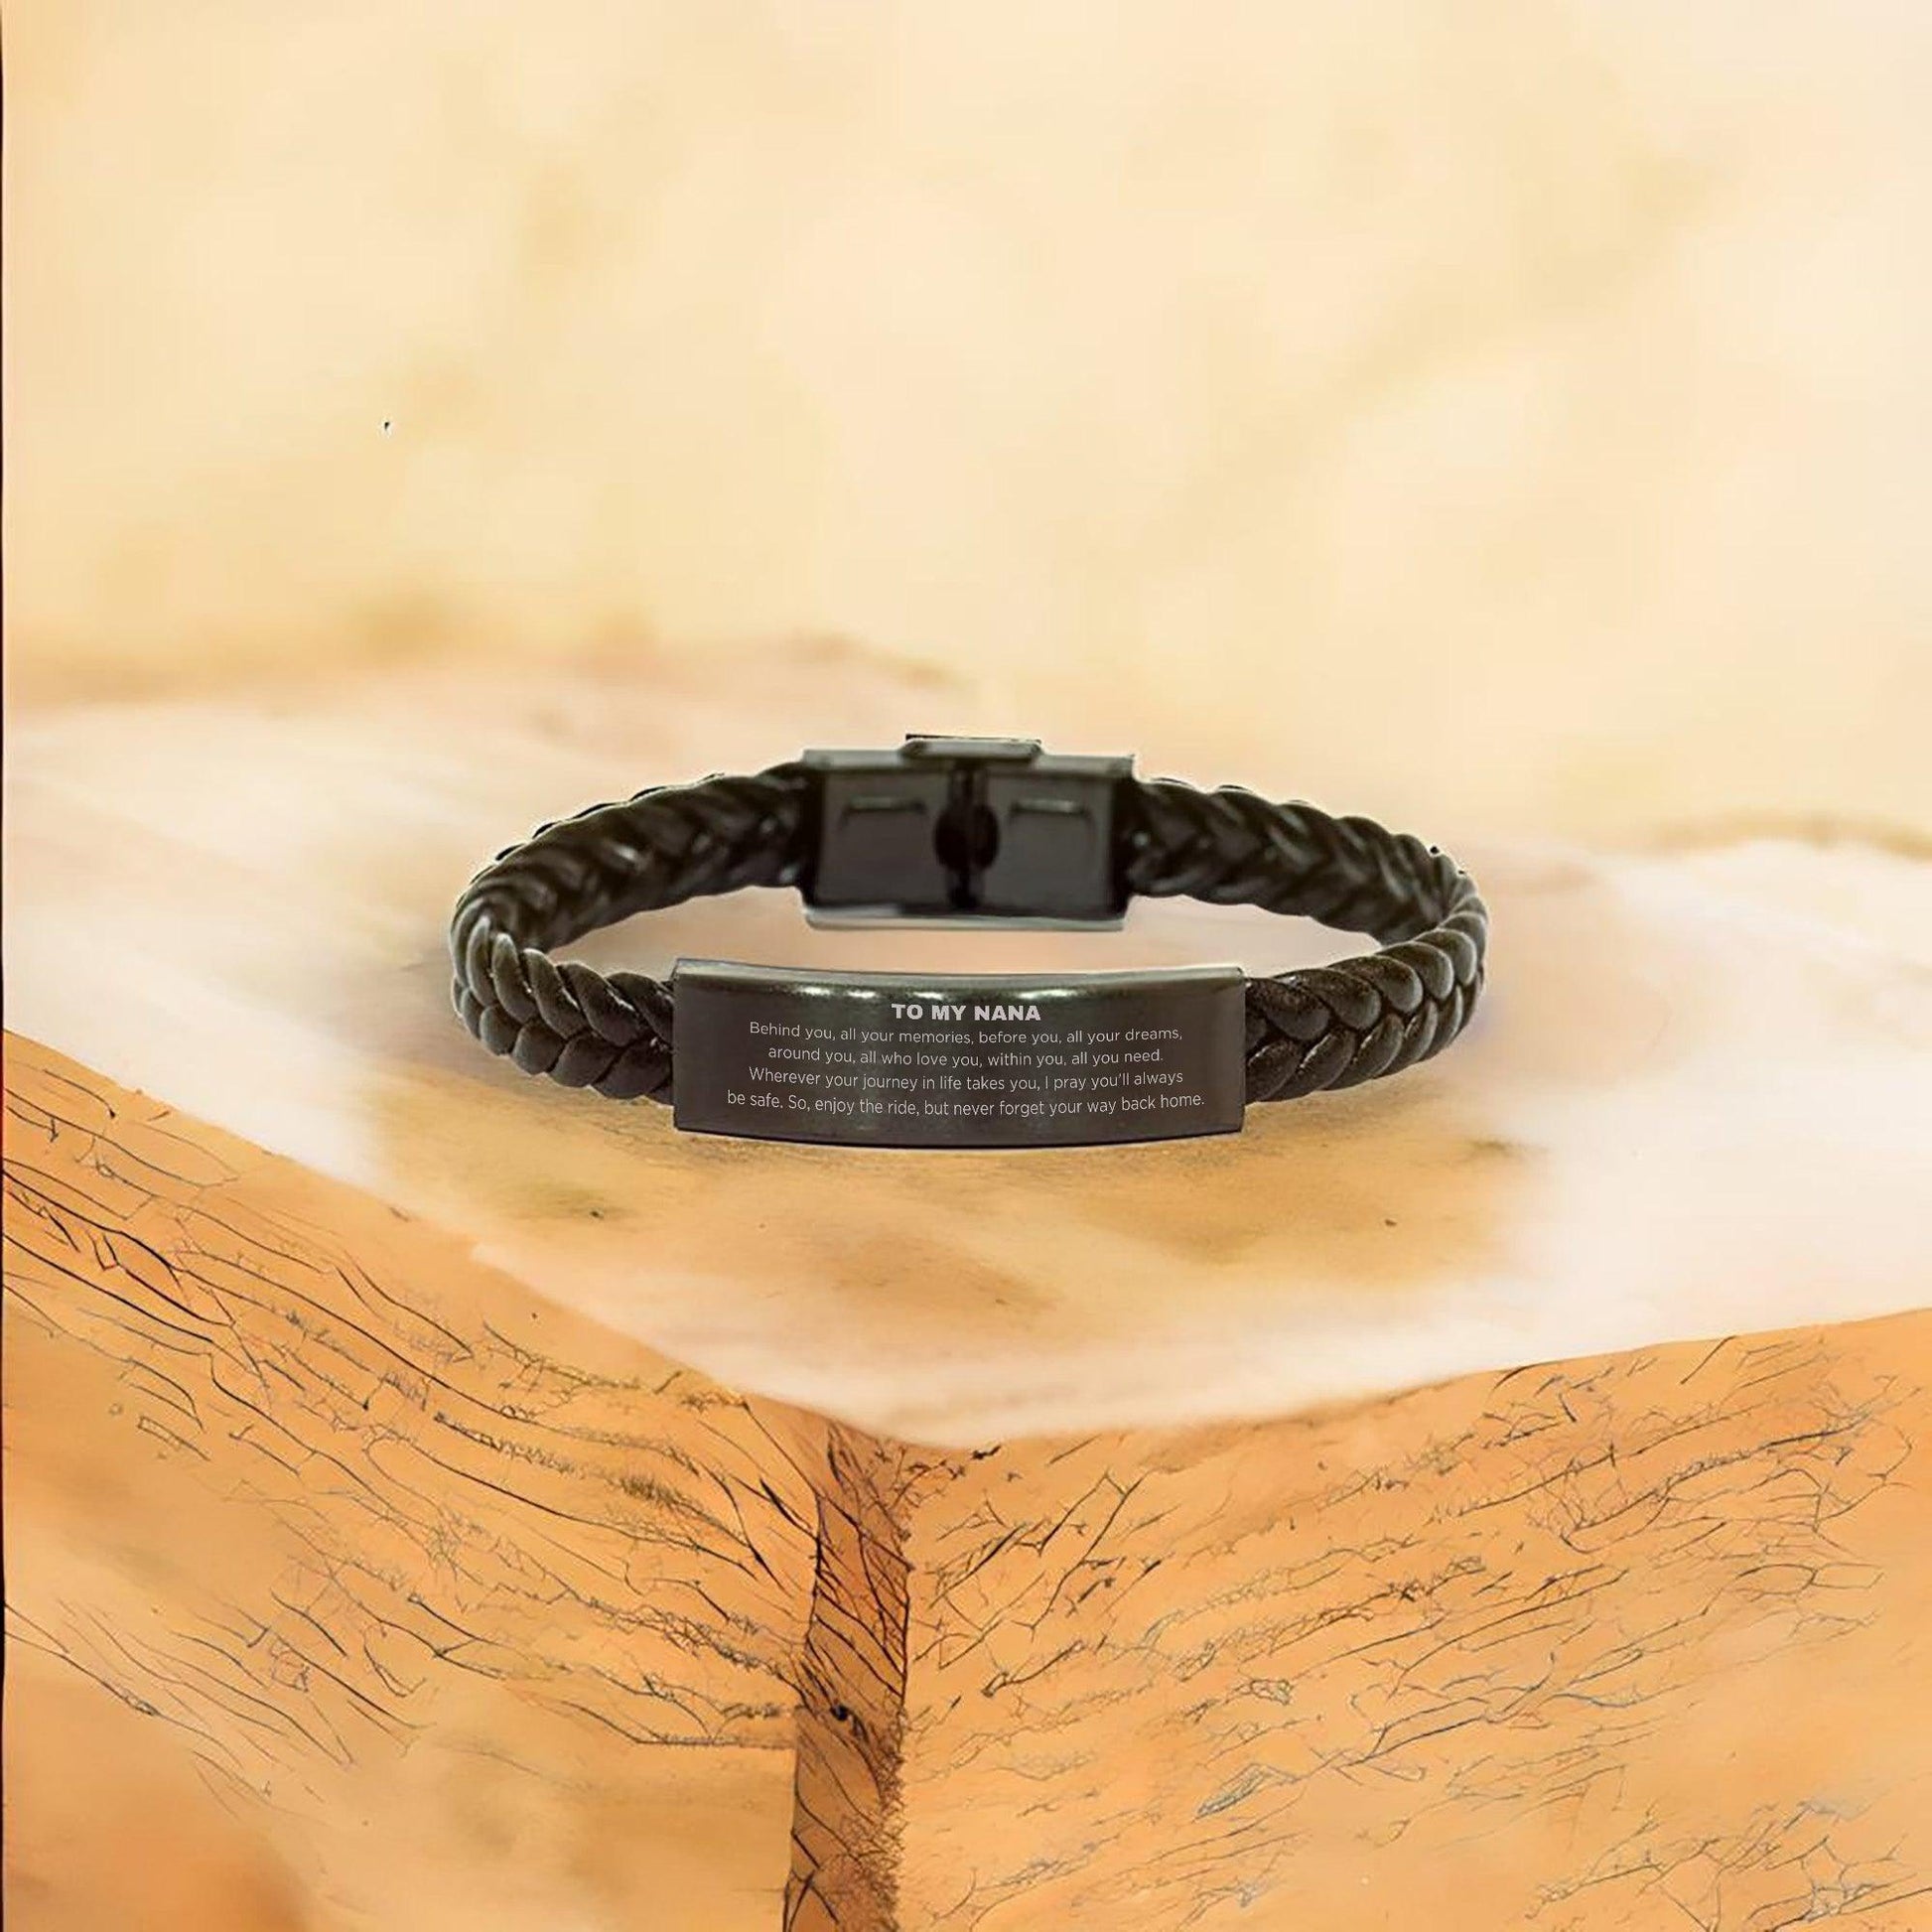 Nana Braided Leather Bracelet,Birthday Christmas Unique Gifts Behind you, all your memories, before you, all your dreams - Mallard Moon Gift Shop